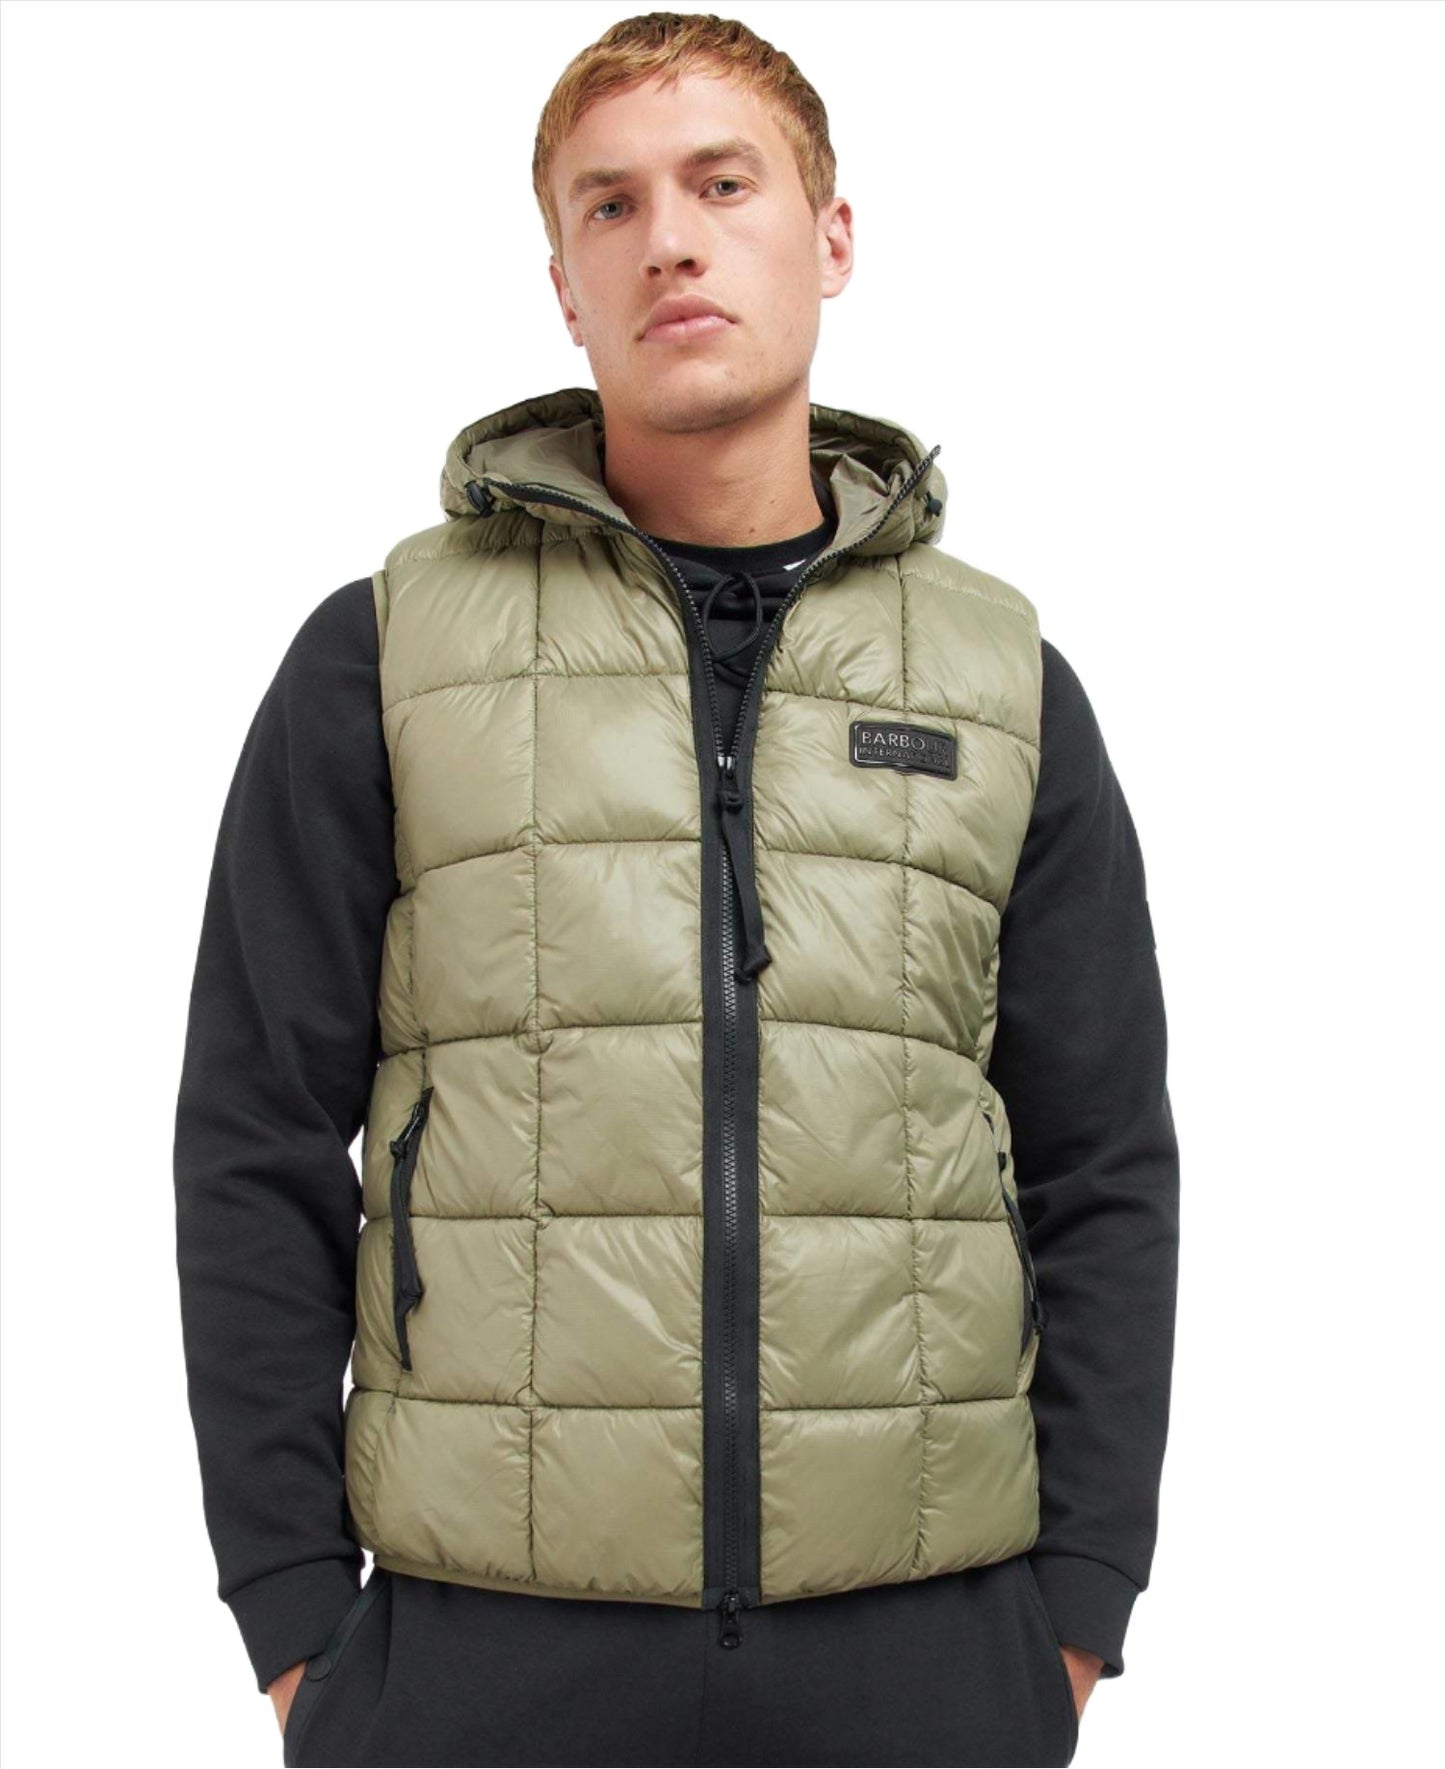 Barbour Highbridge Gilet - The Luxury Promotional Gifts Company Limited